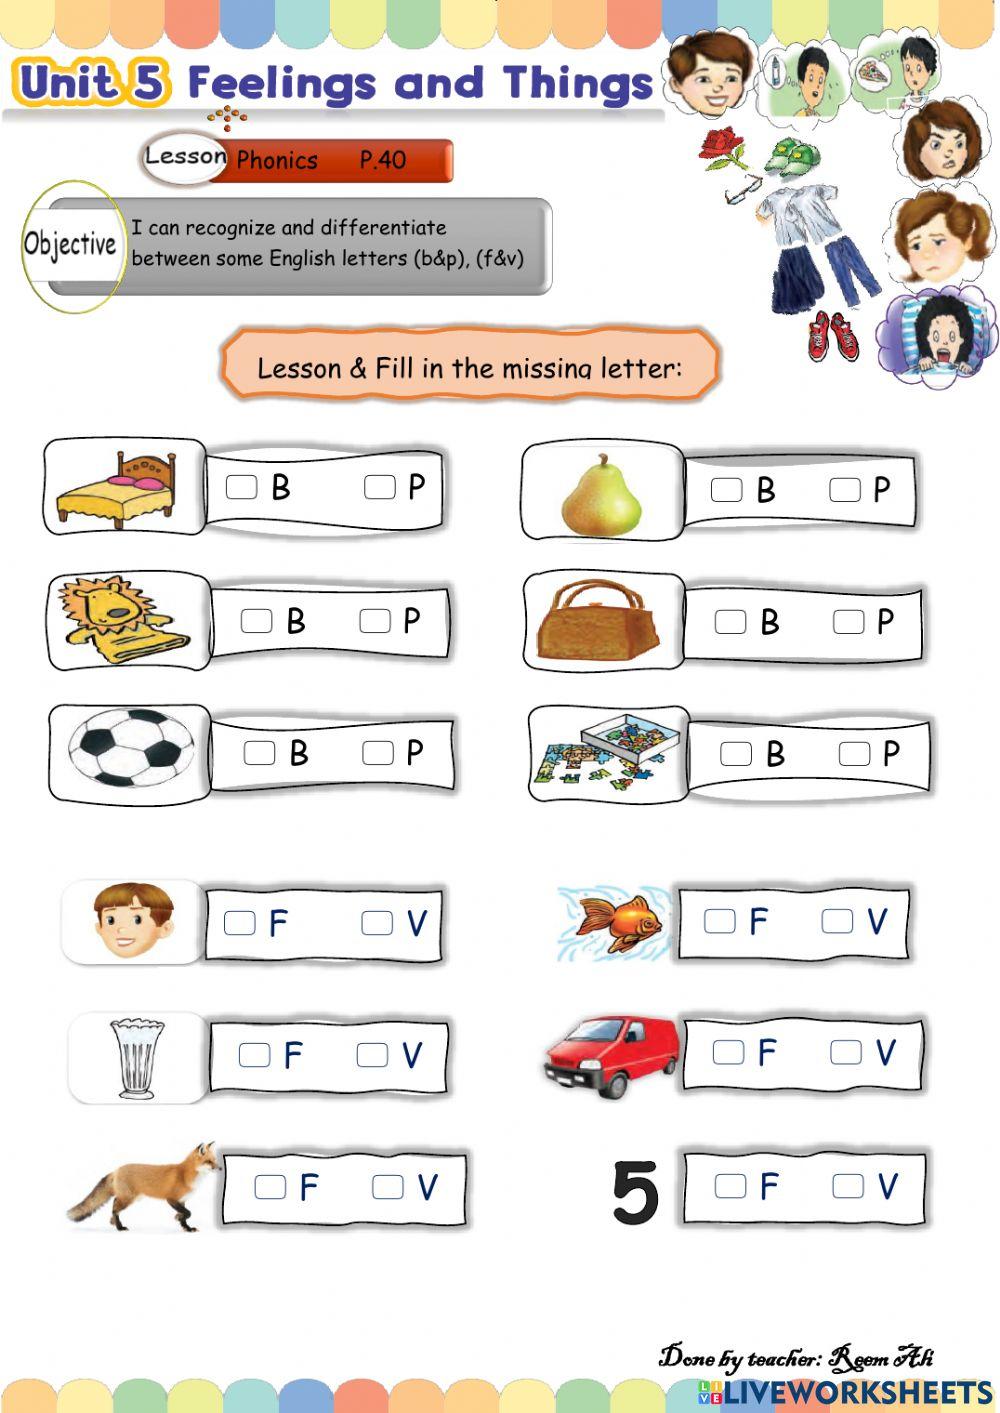 We Can2 U5 L4 I can recognize and differentiate between some English letters (b&p), (f&v)